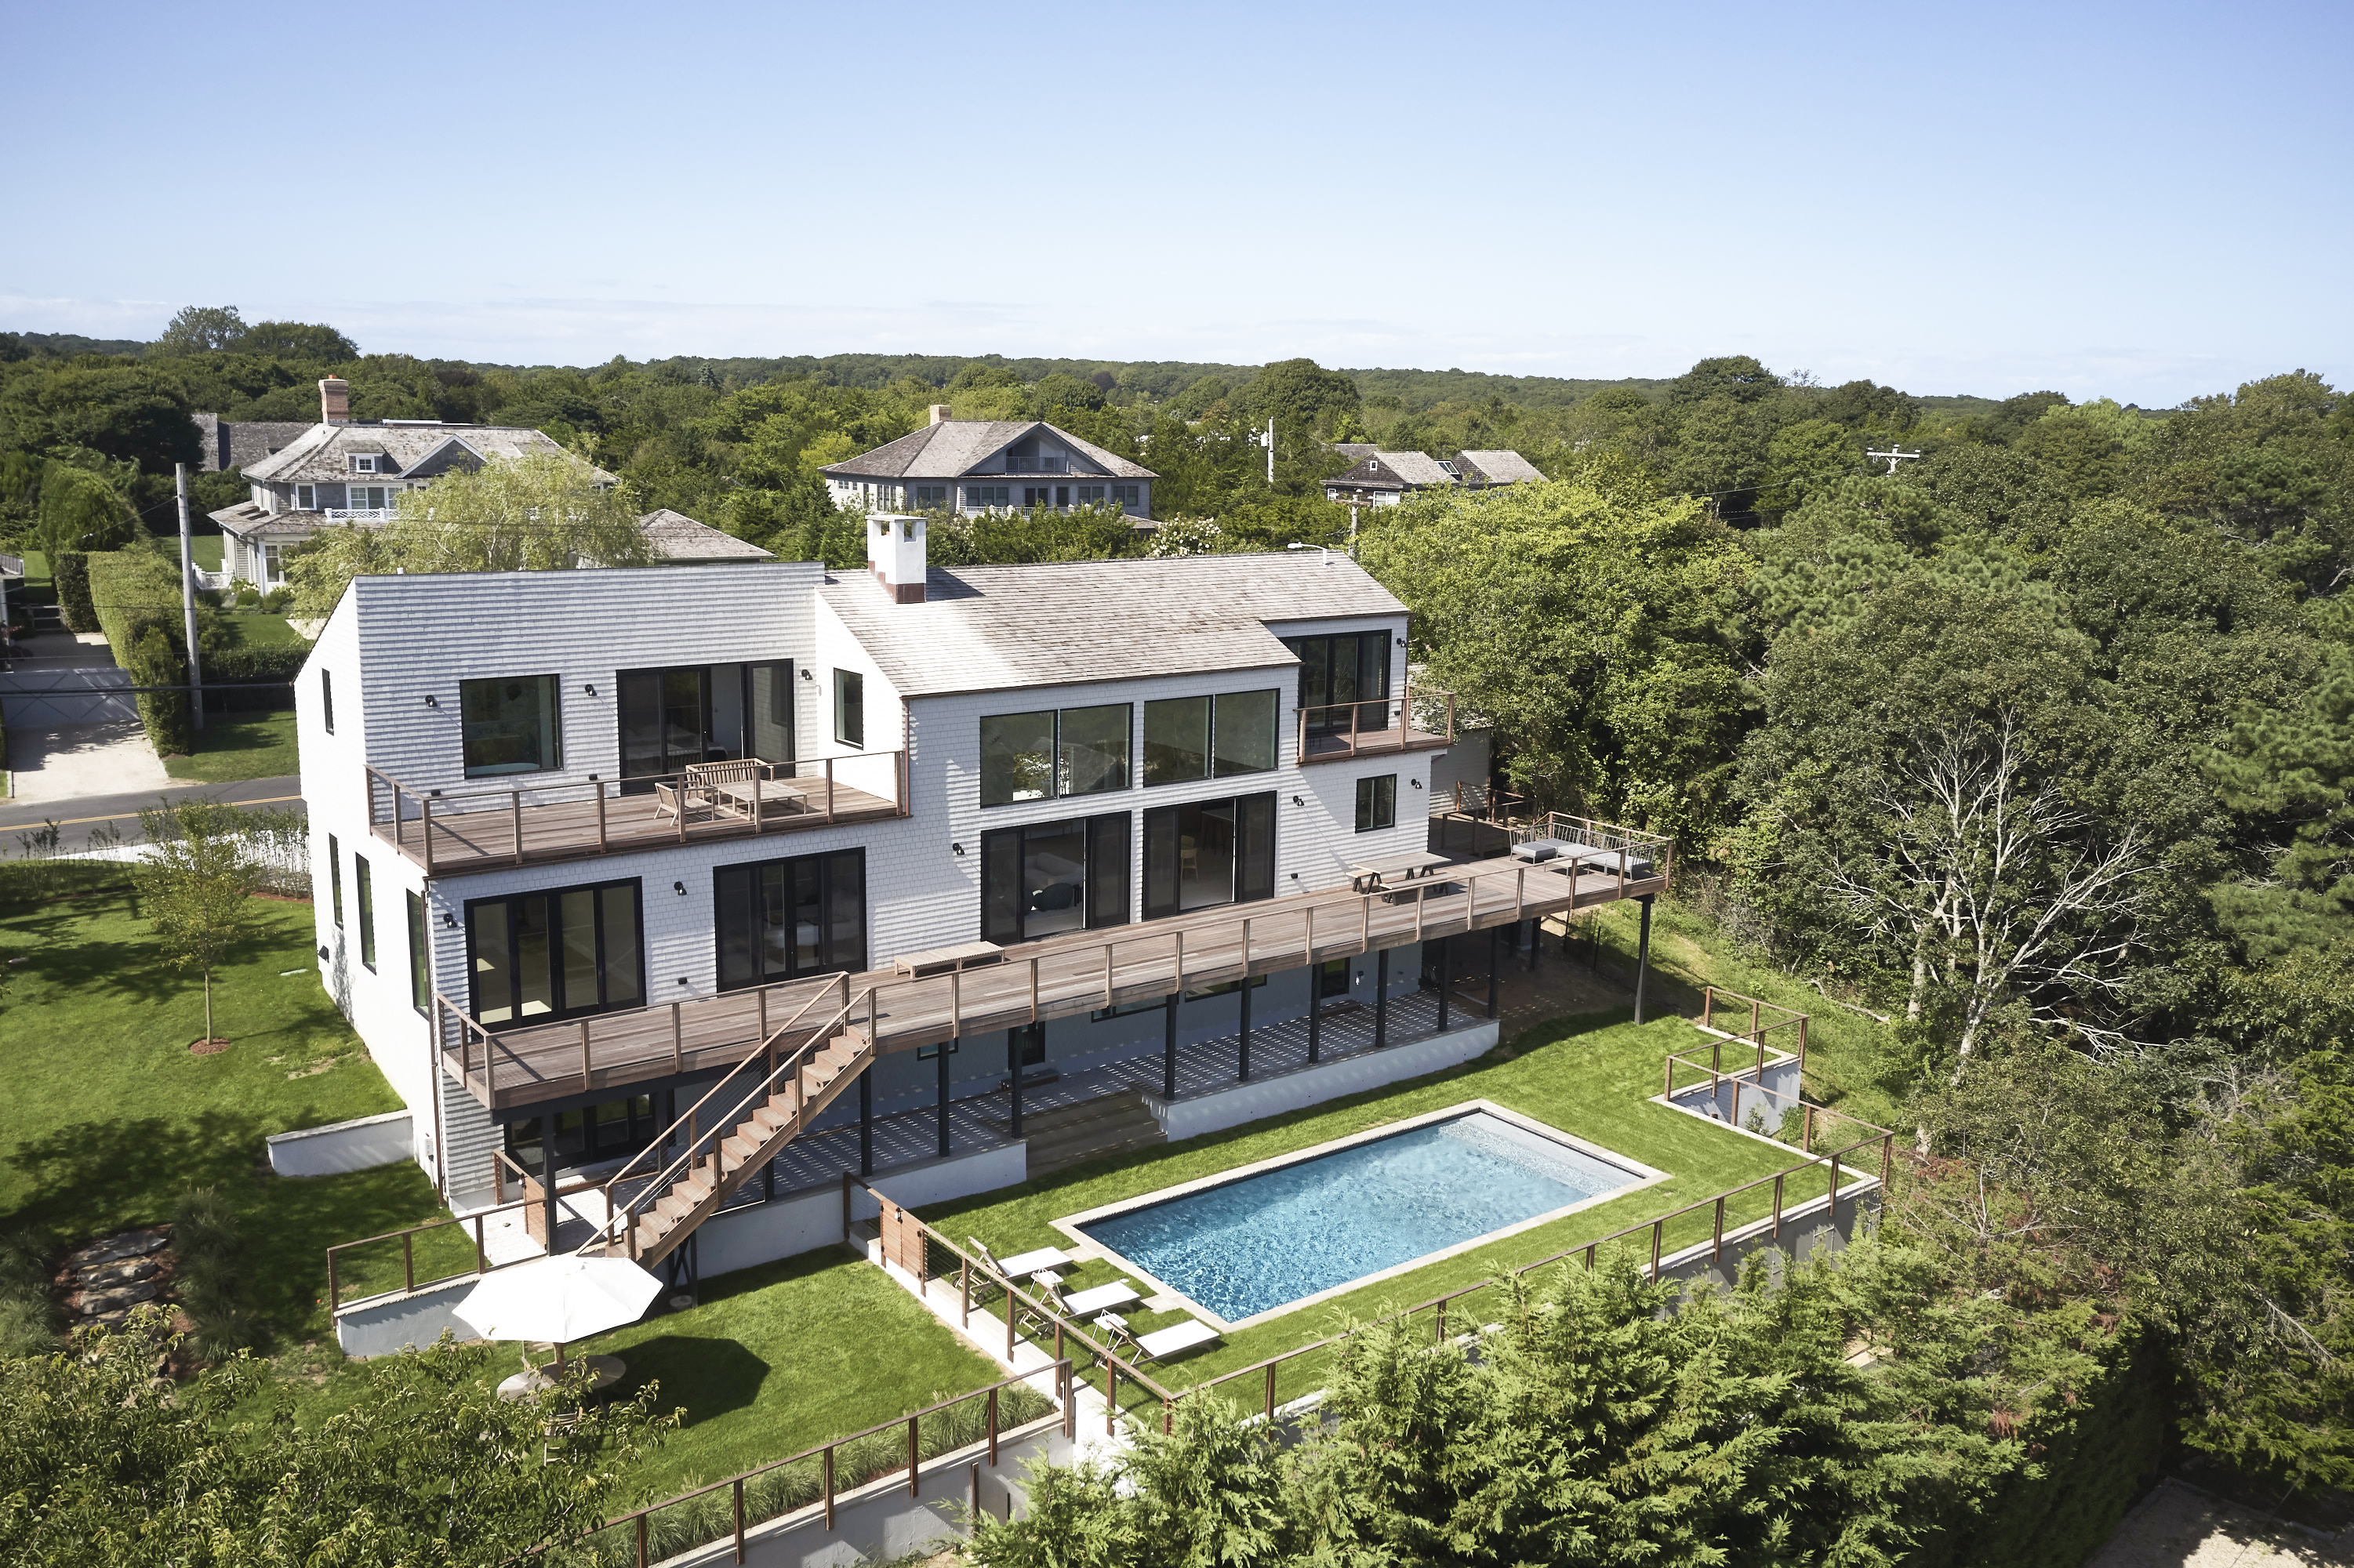 Natural stone creates modern luxury and Minimalism at this oceanfront Hamptons home